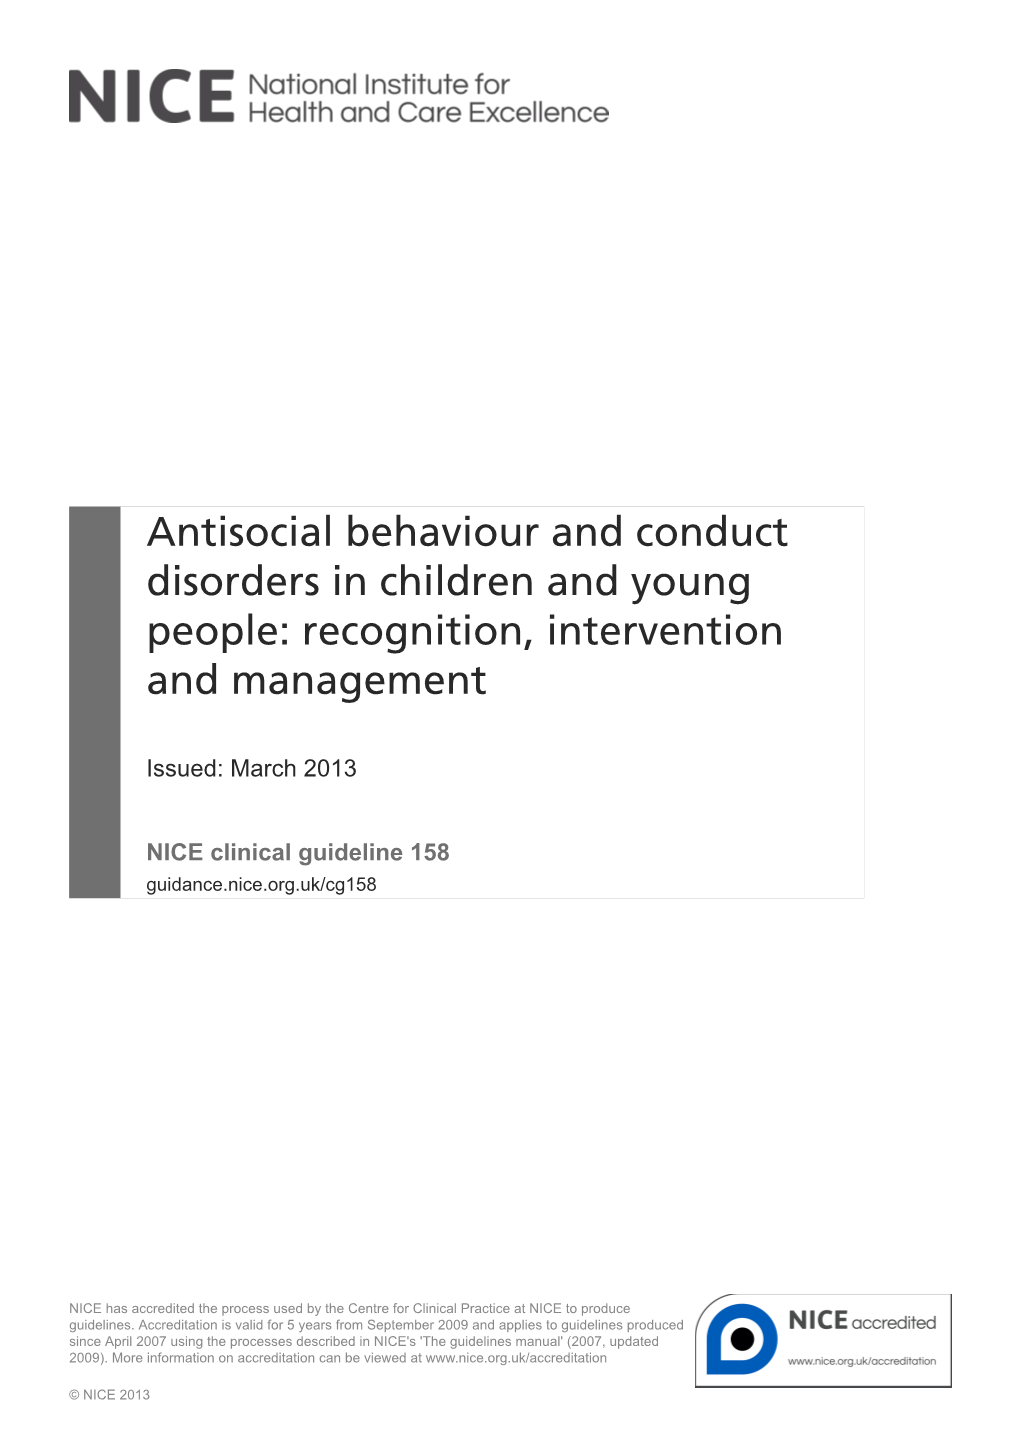 Antisocial Behaviour and Conduct Disorders in Children and Young People: Recognition, Intervention and Management